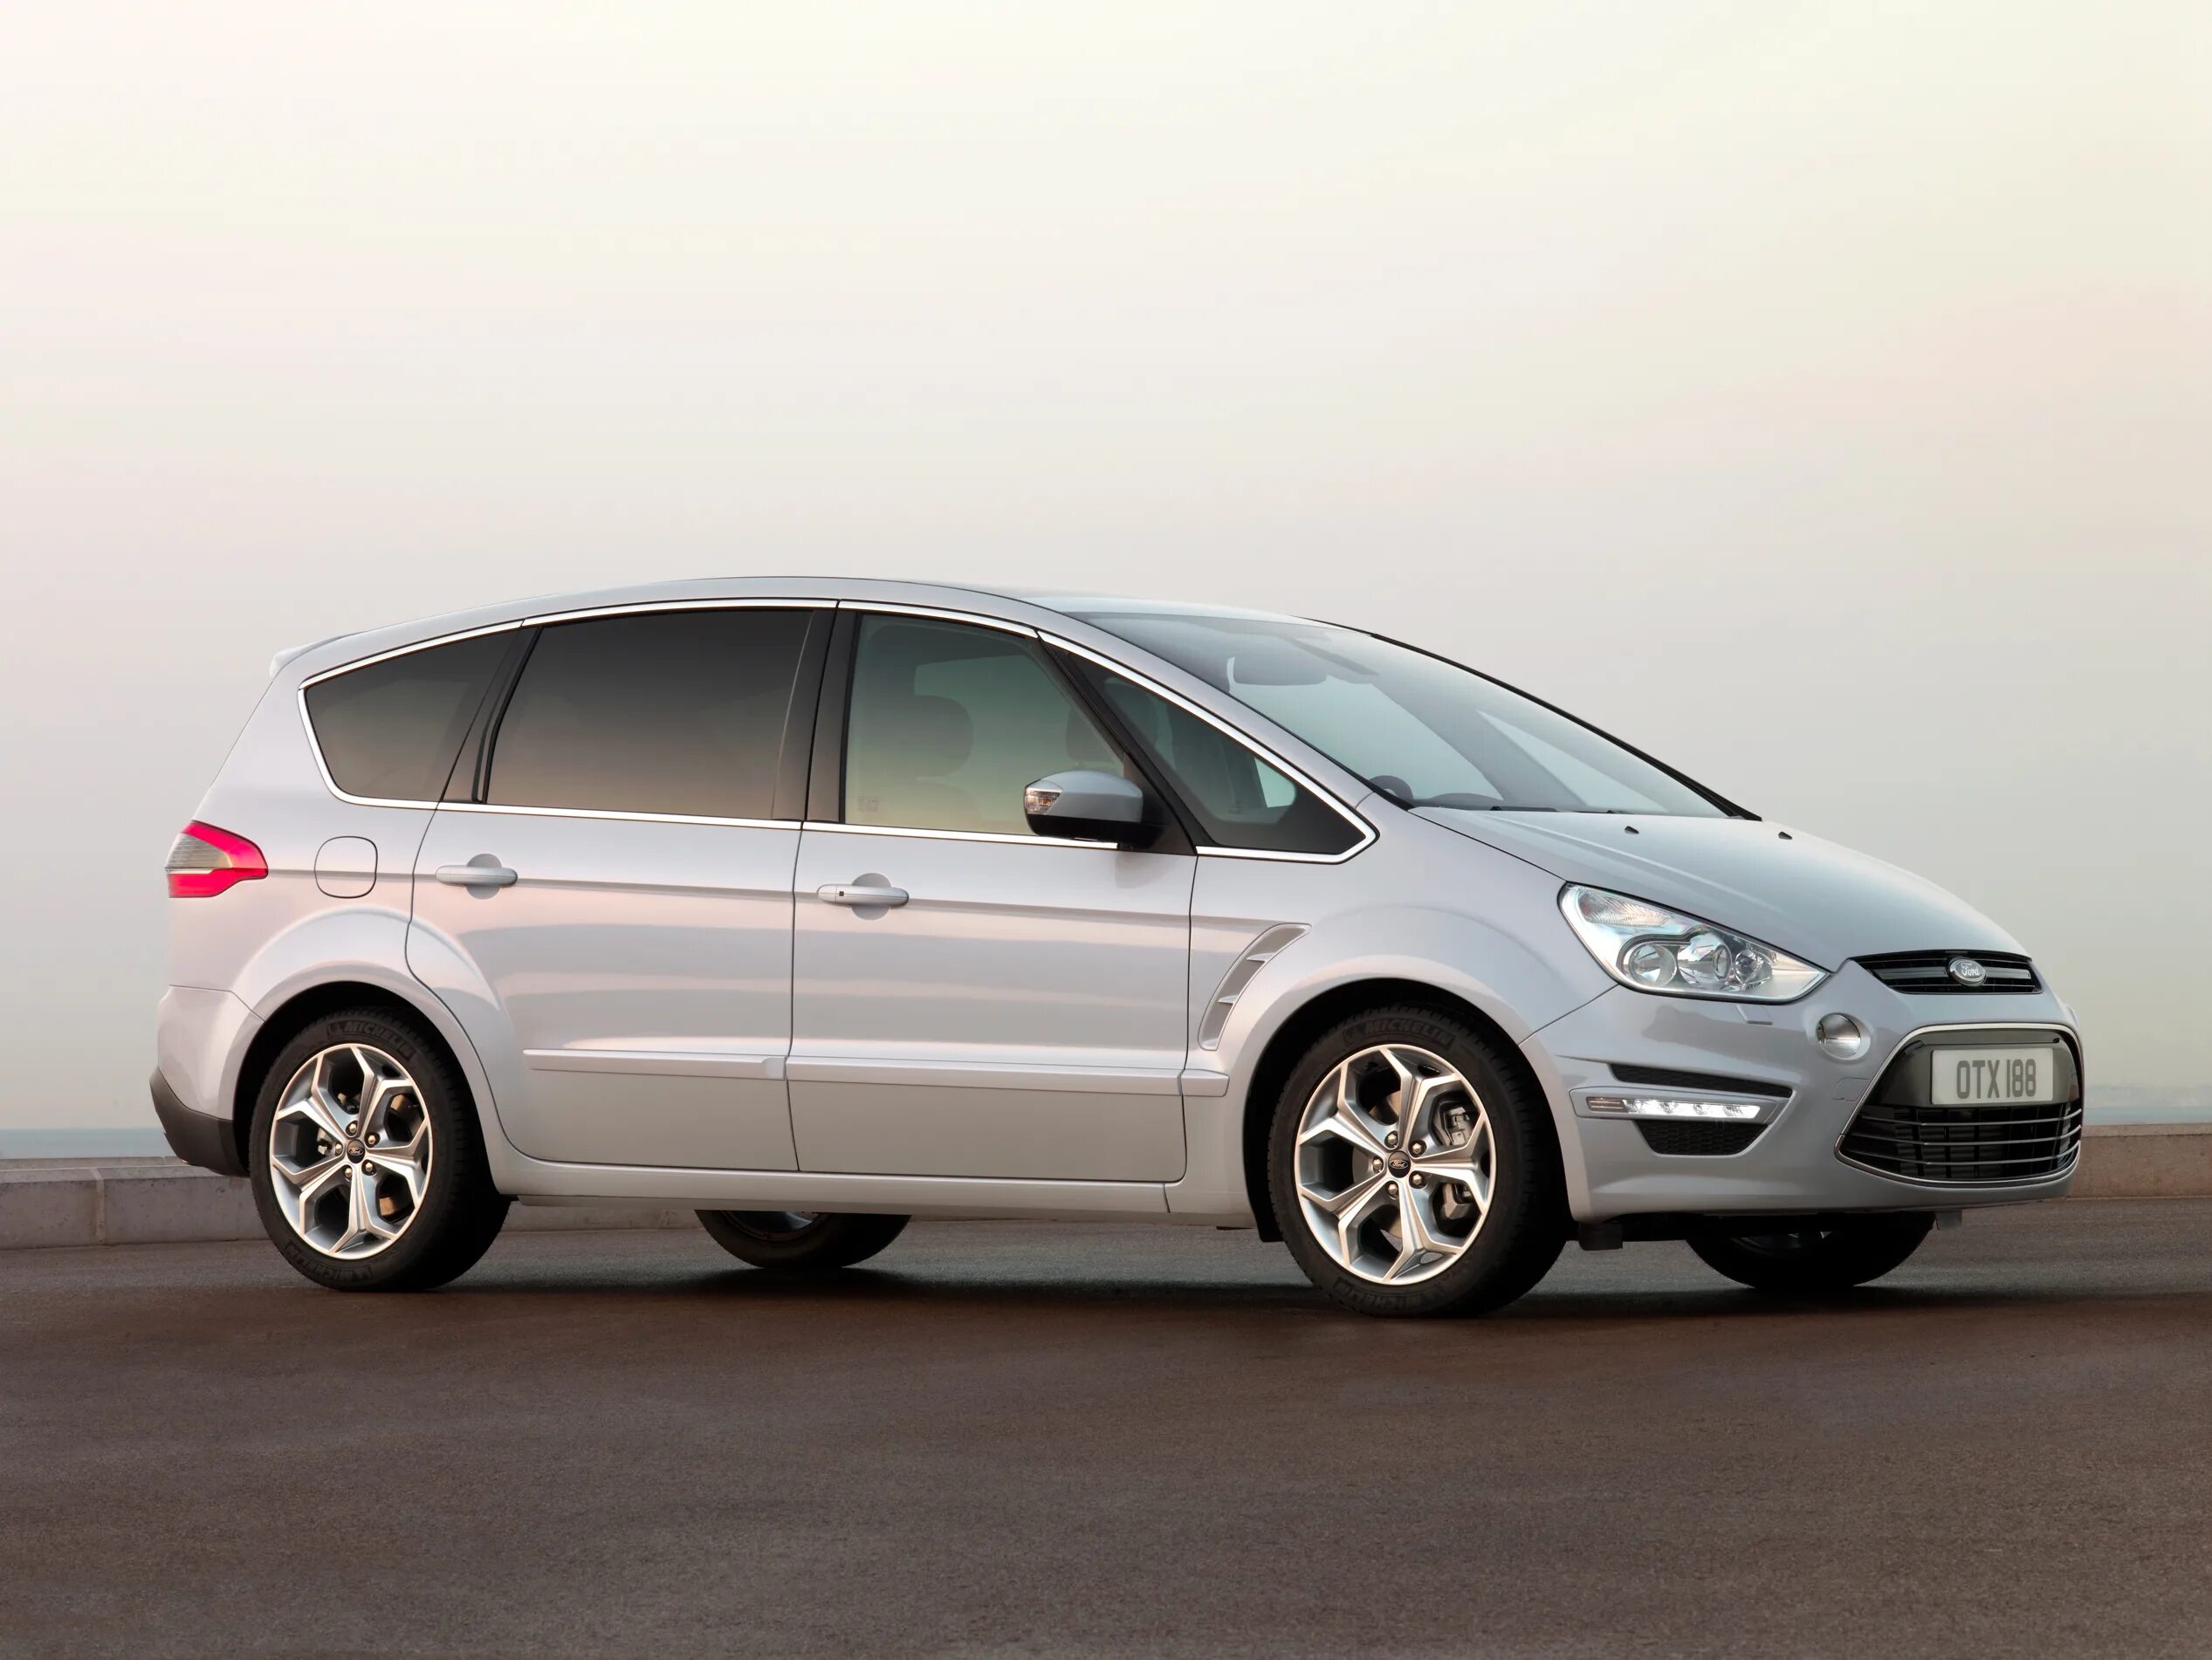 Форд s max. Ford s Max 2010. Ford s Max 2010 Рестайлинг. Ford s Max 2011. Ford s Max 2012.